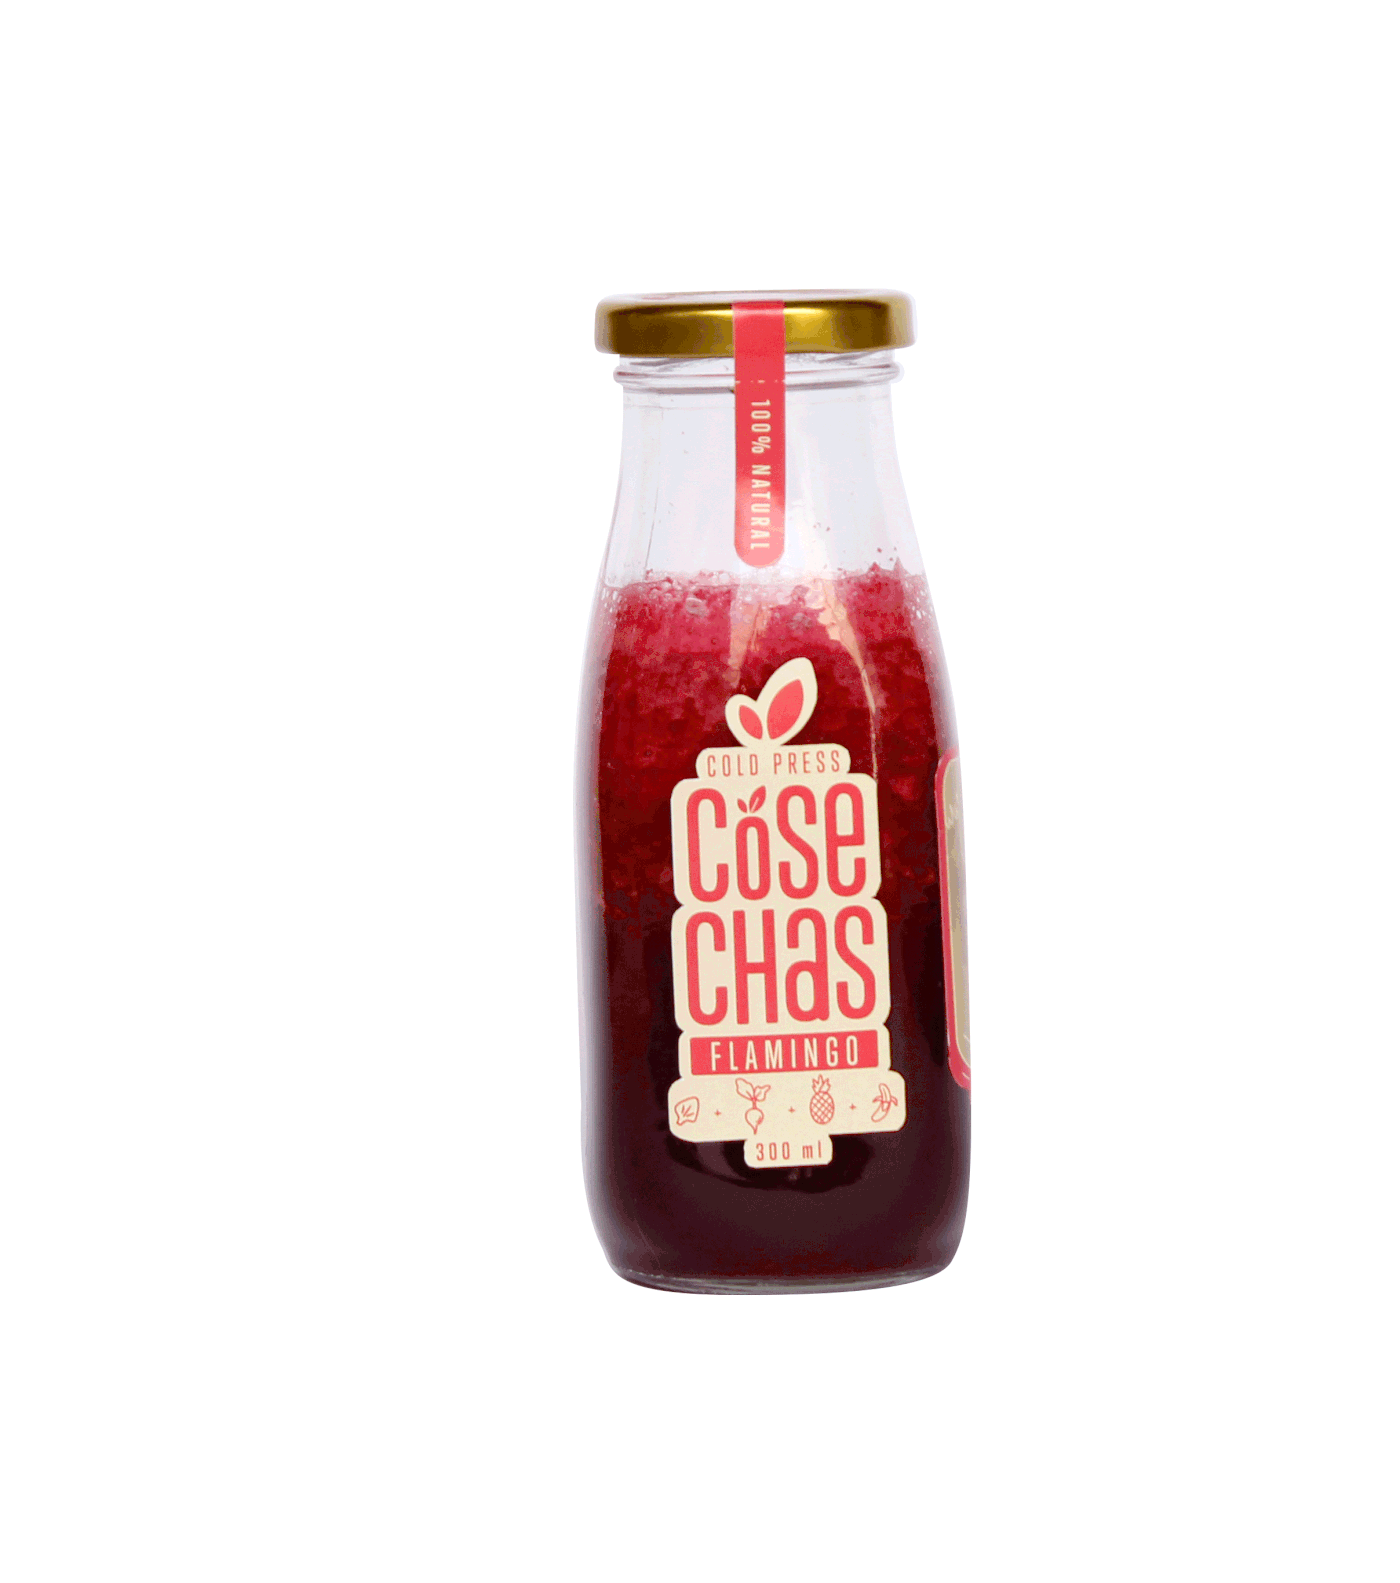 branding  Cold Press cosechas glass ILLUSTRATION  juice Packaging